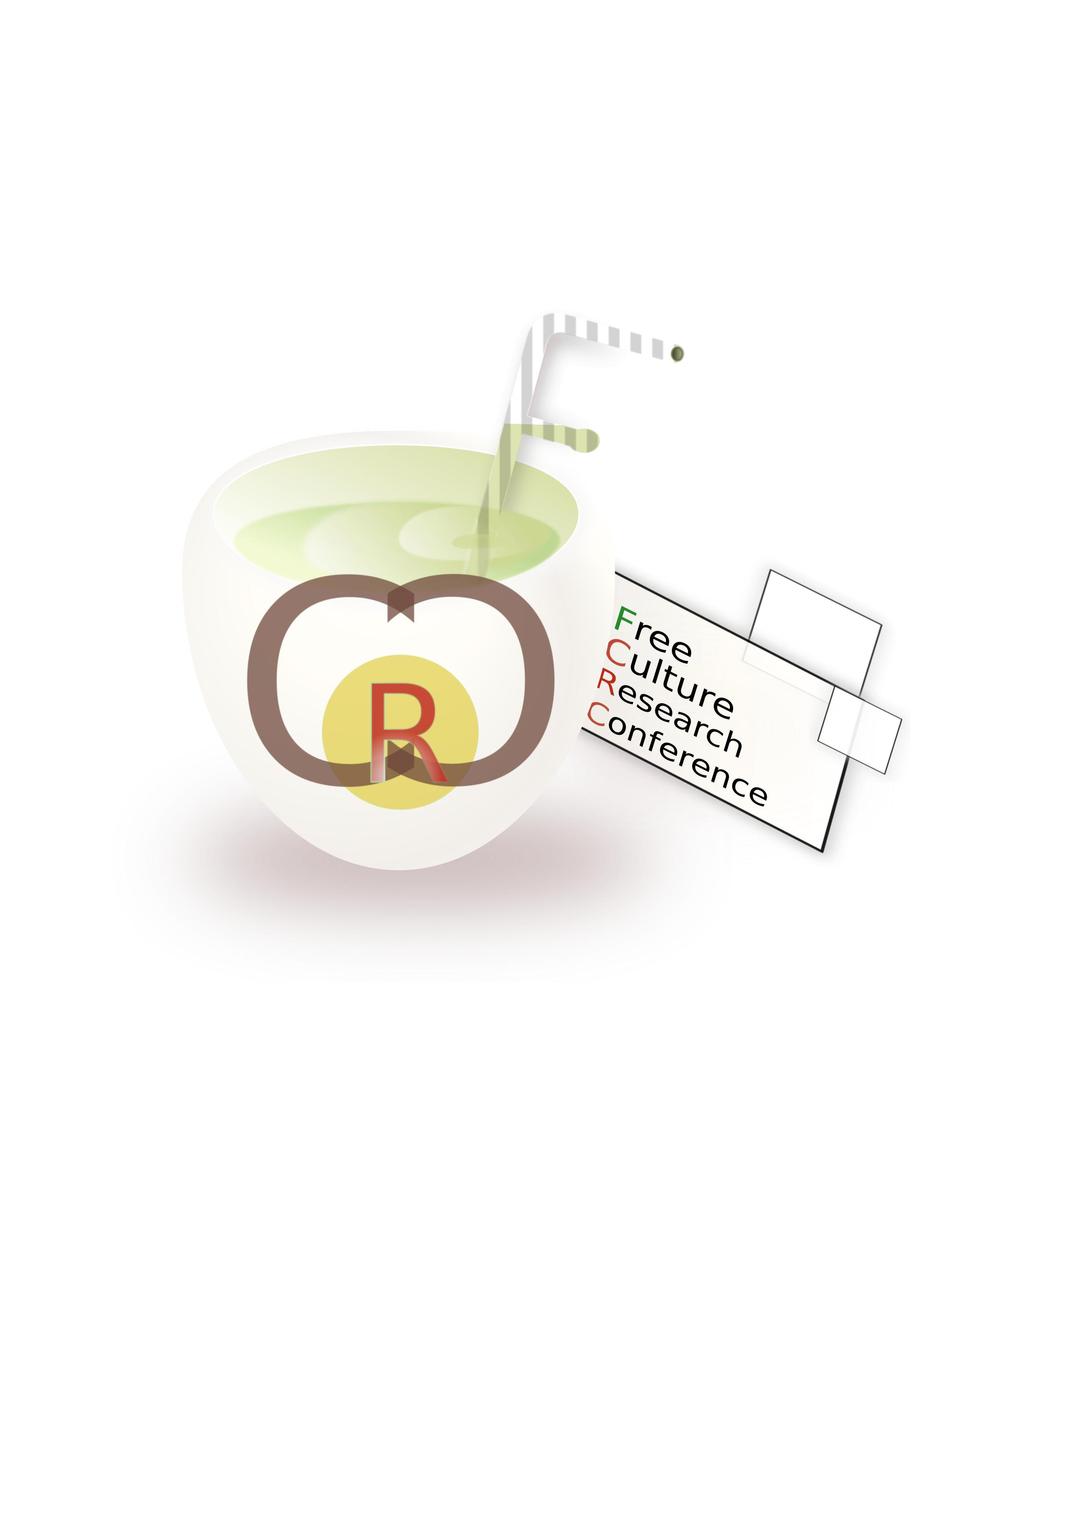 Free Culture Research Conference (Logo Candidate) png transparent